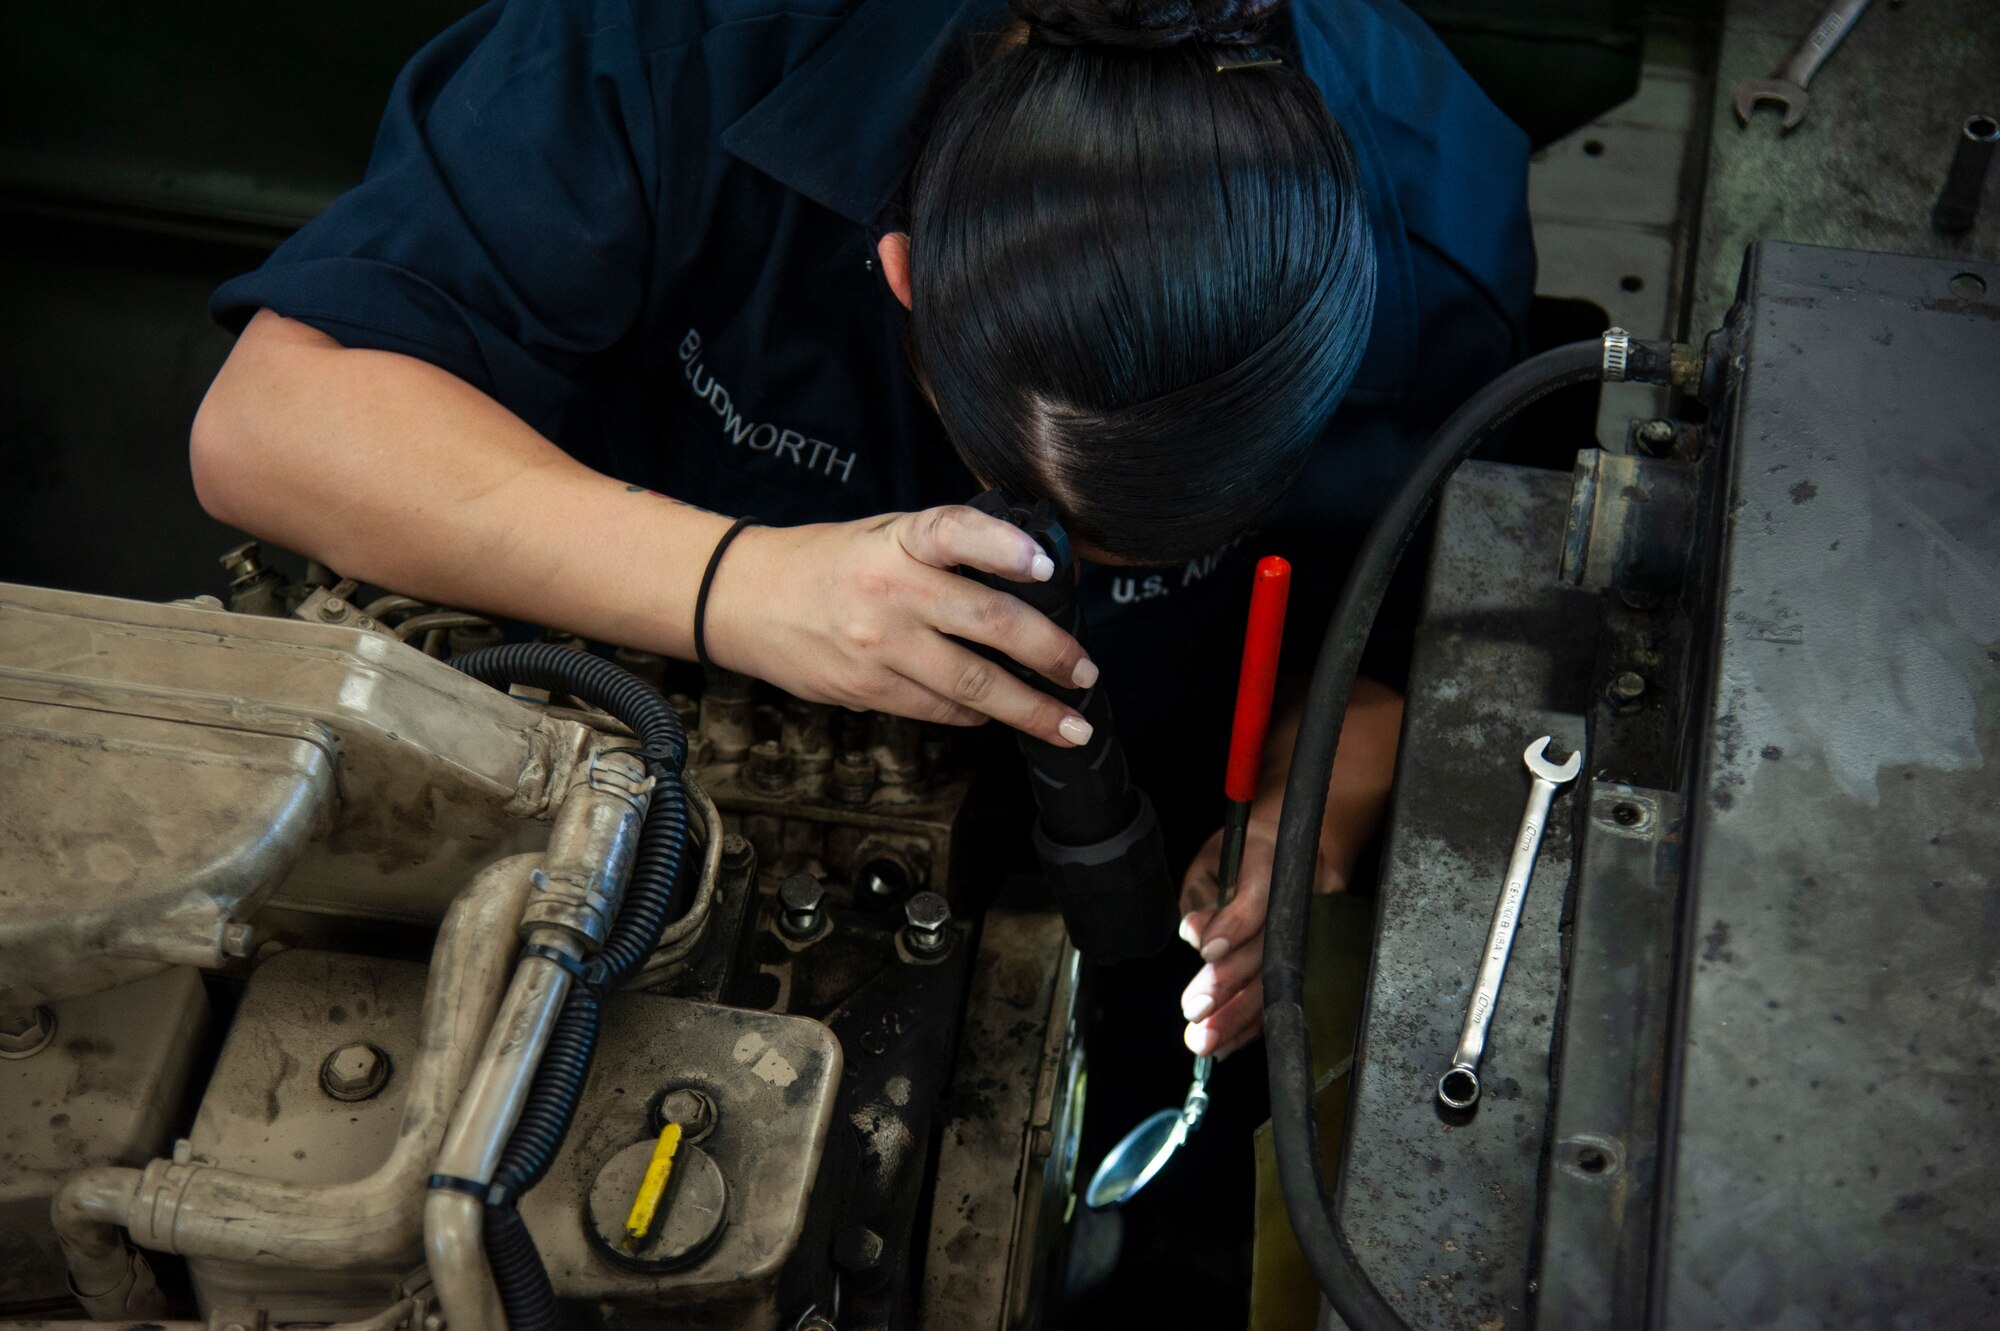 U.S. Air Force Staff Sgt. Virginia Bludworth, a 6th Logistics Readiness Squadron vehicle mechanic, uses a flashlight and inspection mirror to view the fuel injection pump on an MB-2 aircraft tow tractor, July 15, 2020, at MacDill Air Force Base, Fla.